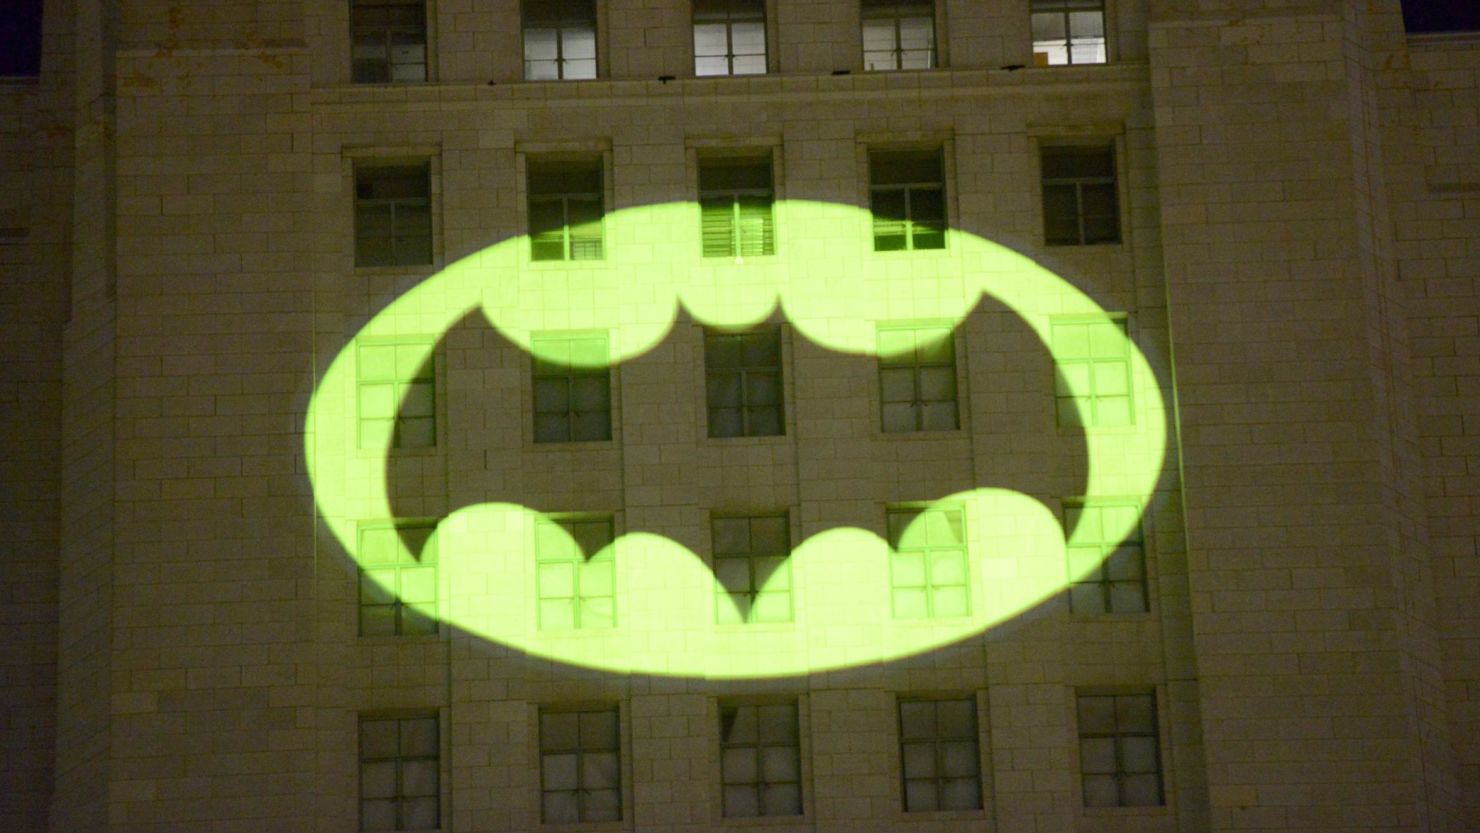 Batman Day Celebrated With Bat Signal by Cities